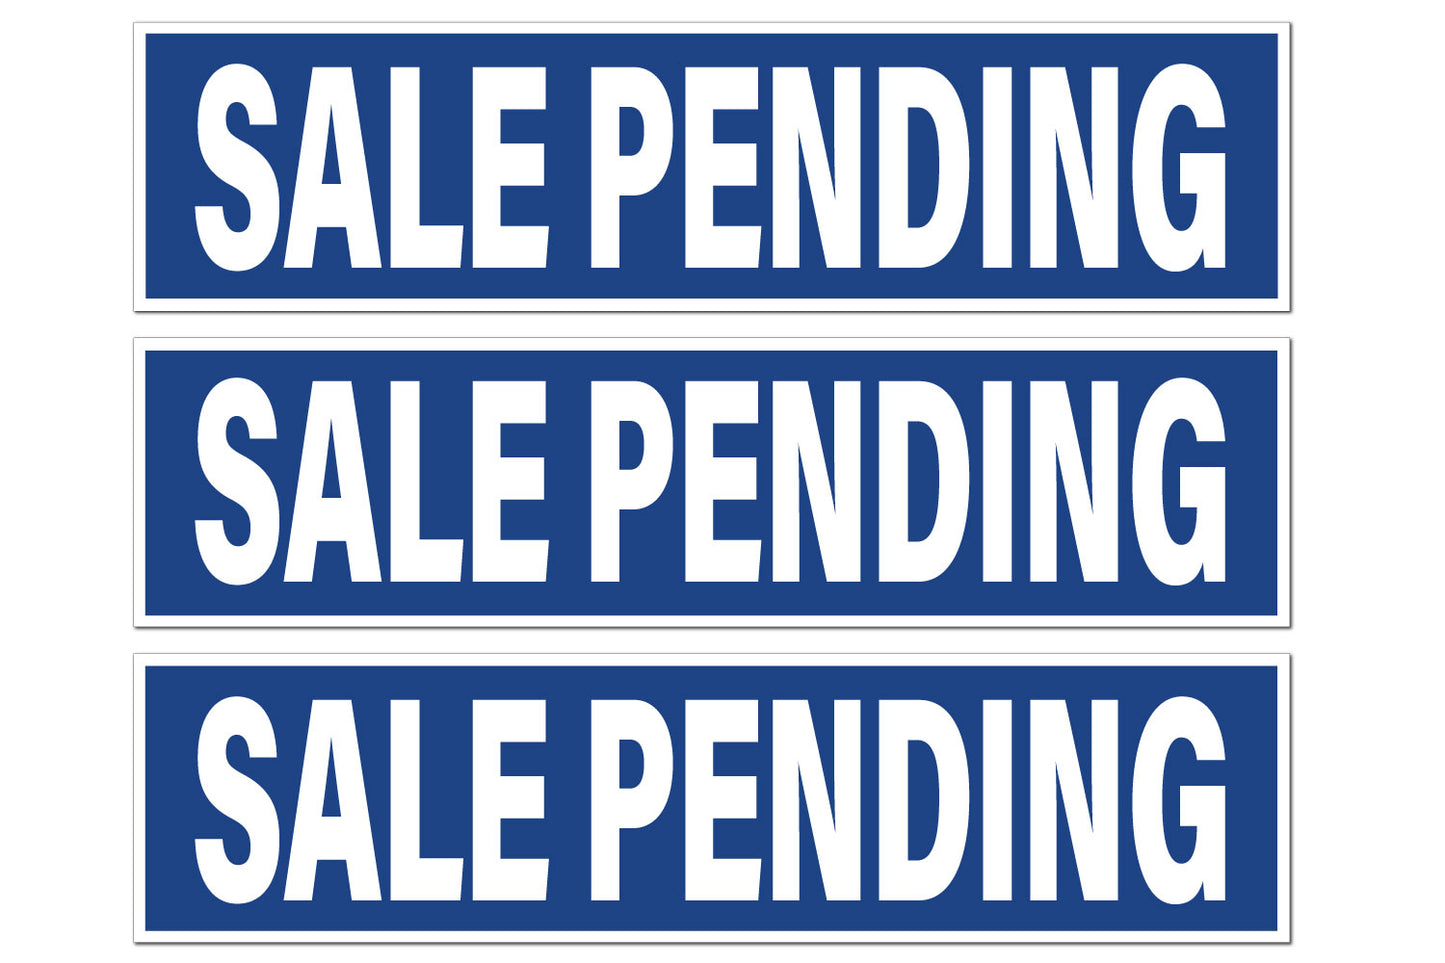 Sale Pending sign riders for the real estate industry. Sign riders feature bold white text on a blue background.